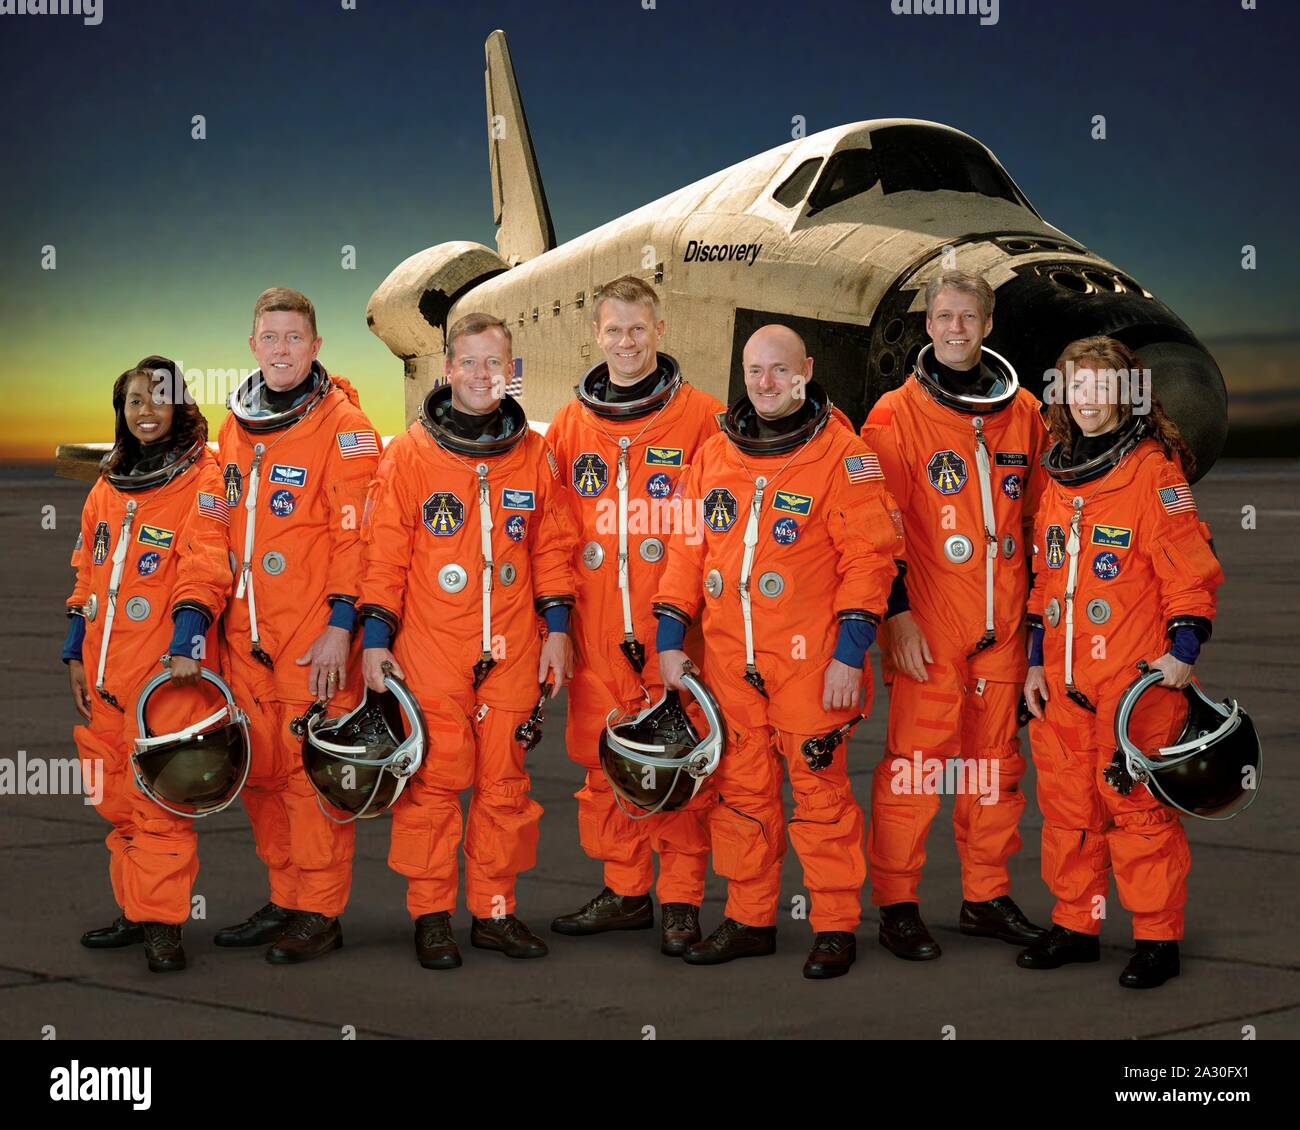 ***FILE PHOTO*** Archive Image relating to the film, Lucy In The Sky, loosely based on the events surrounding the love triangle involving Astronaut Lisa Nowak. FILE: In this photo released by NASA, these seven astronauts take a break from training to pose for the STS-121 crew portrait in Houston, Texas on April 5, 2006. From the left are astronauts Stephanie D. Wilson, Michael E. Fossum, both mission specialists; Steven W. Lindsey, commander; Piers J. Sellers, mission specialist; Mark E. Kelly, pilot; European Space Agency (ESA) astronaut Thomas Reiter of Germany; and Lisa M. Nowak, both miss Stock Photo